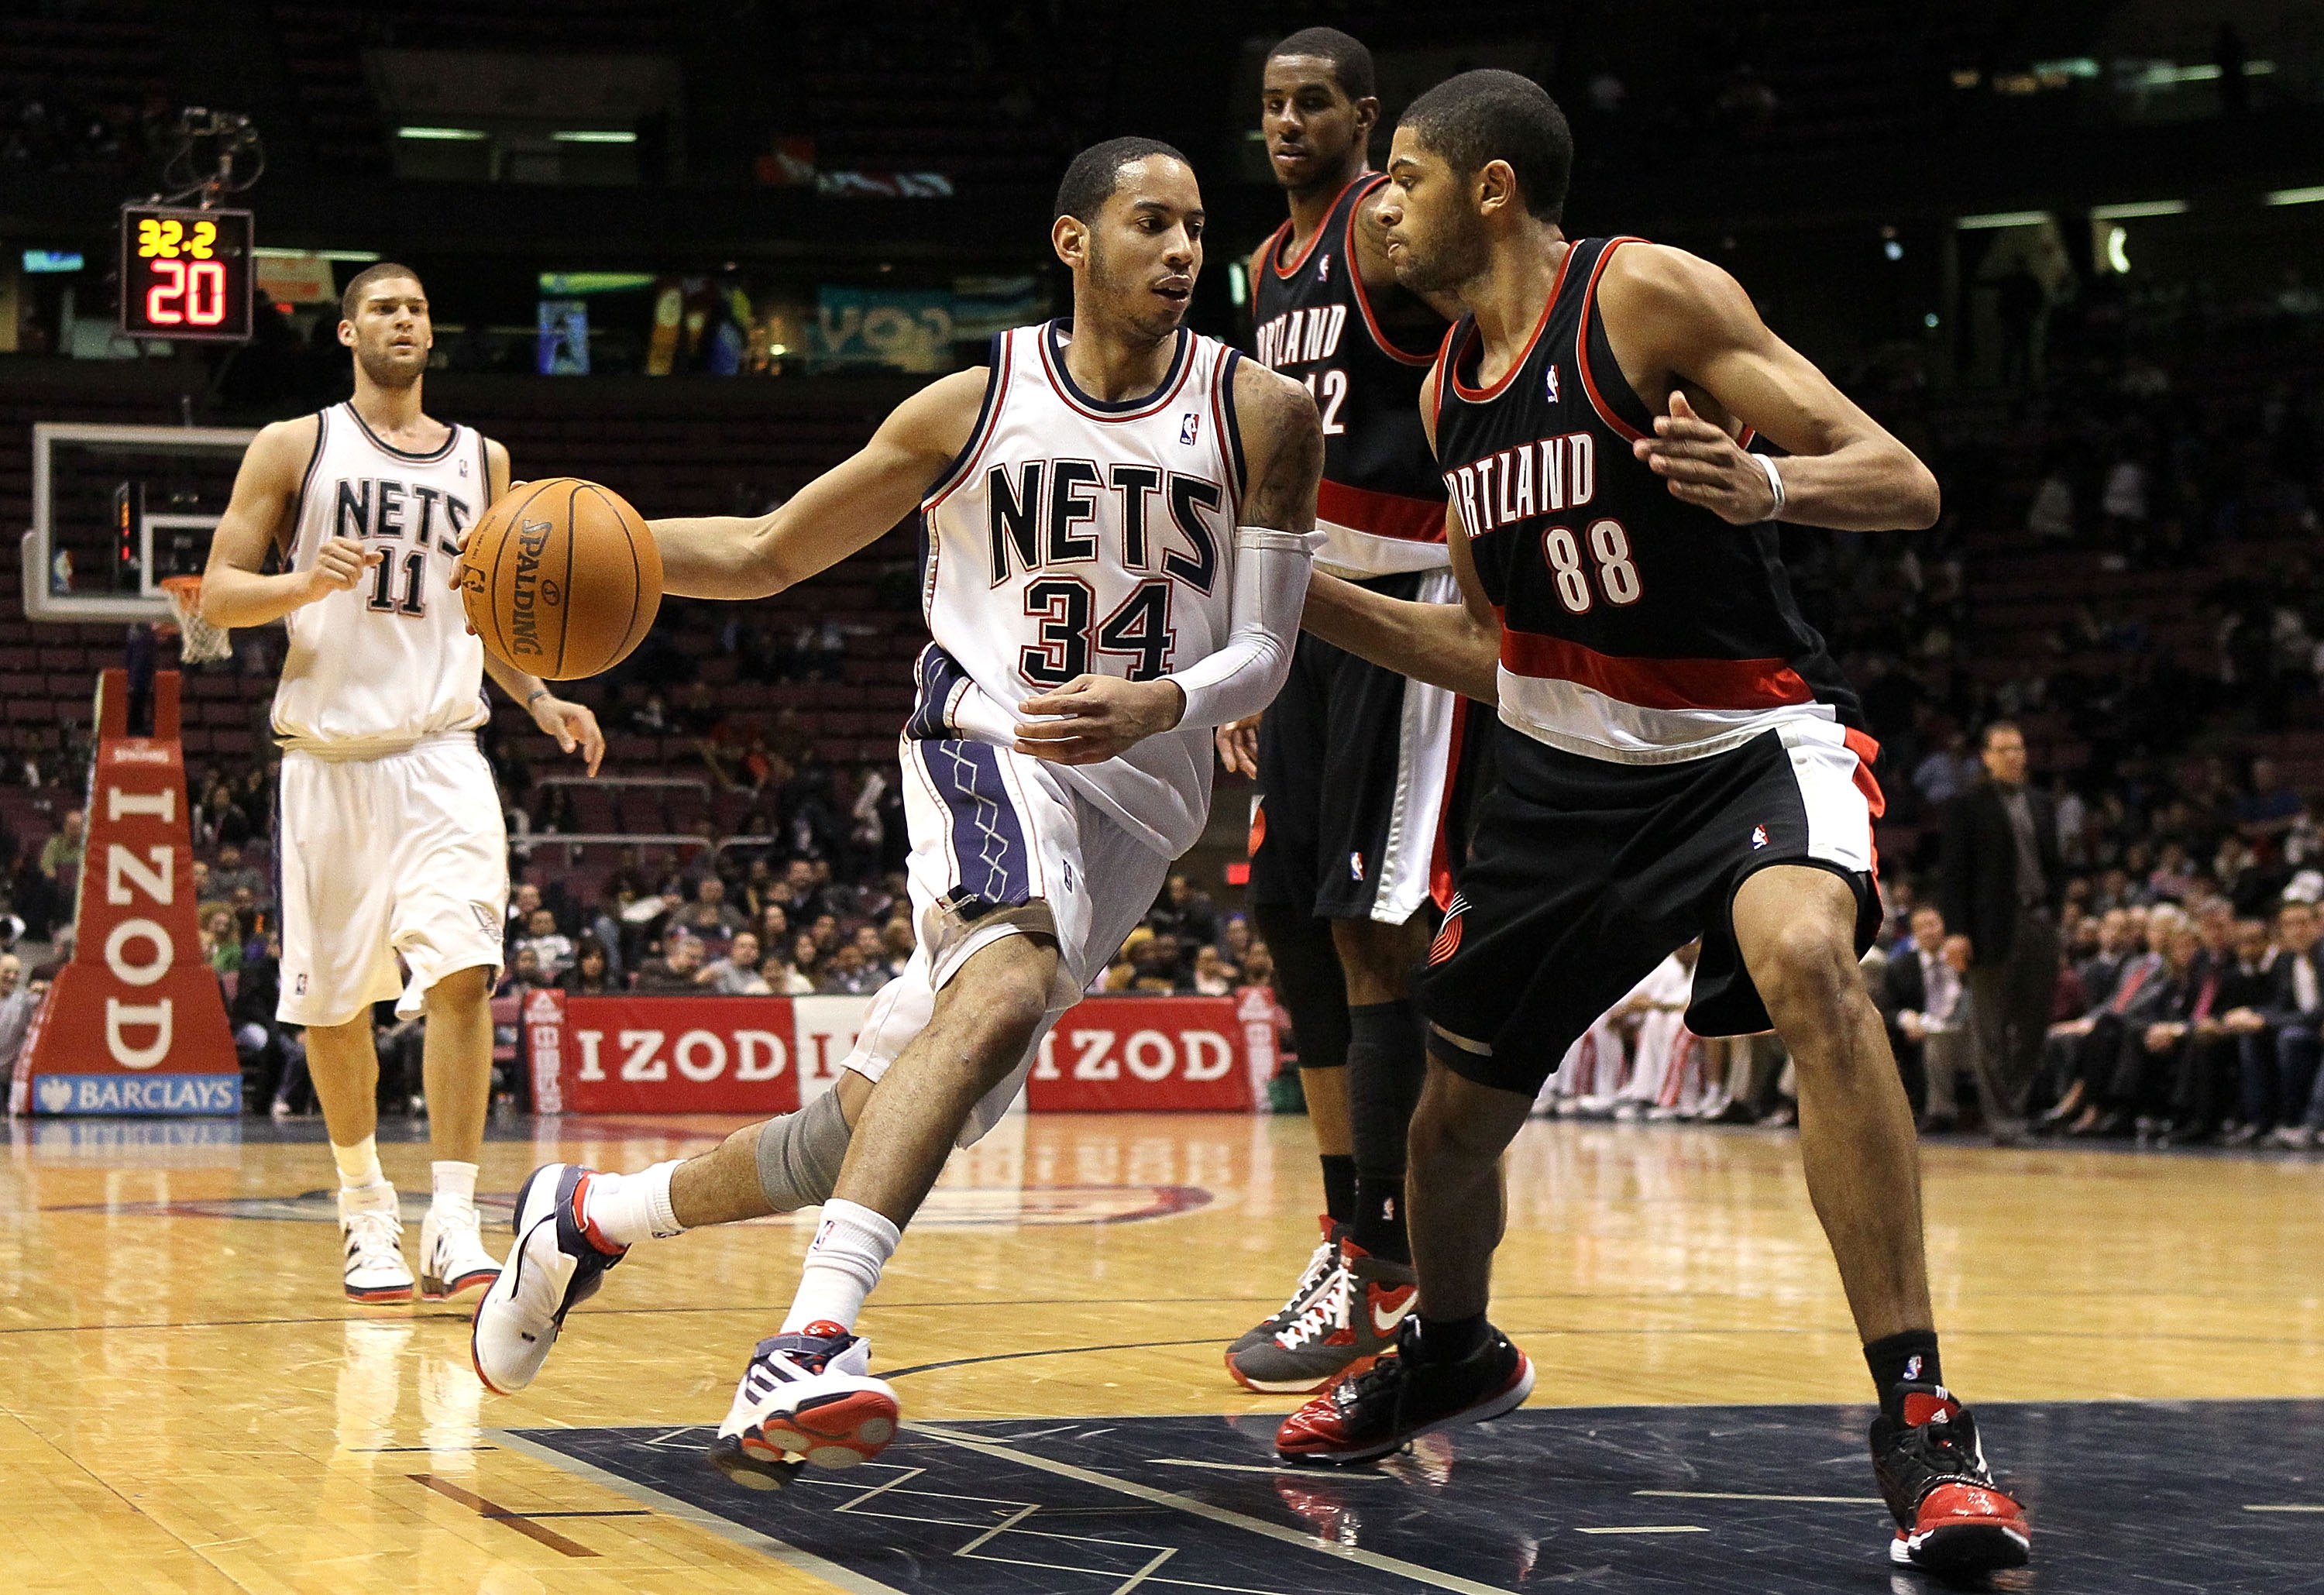 EAST RUTHERFORD, NJ - FEBRUARY 23:  Devin Harris #34 of the New Jersey Nets drives against Nicolas Batum #88 of the Portland Trail Blazers at the Izod Center on February 23, 2010 in East Rutherford, New Jersey.The Blazers defeated the Nets 102-93.NOTE TO